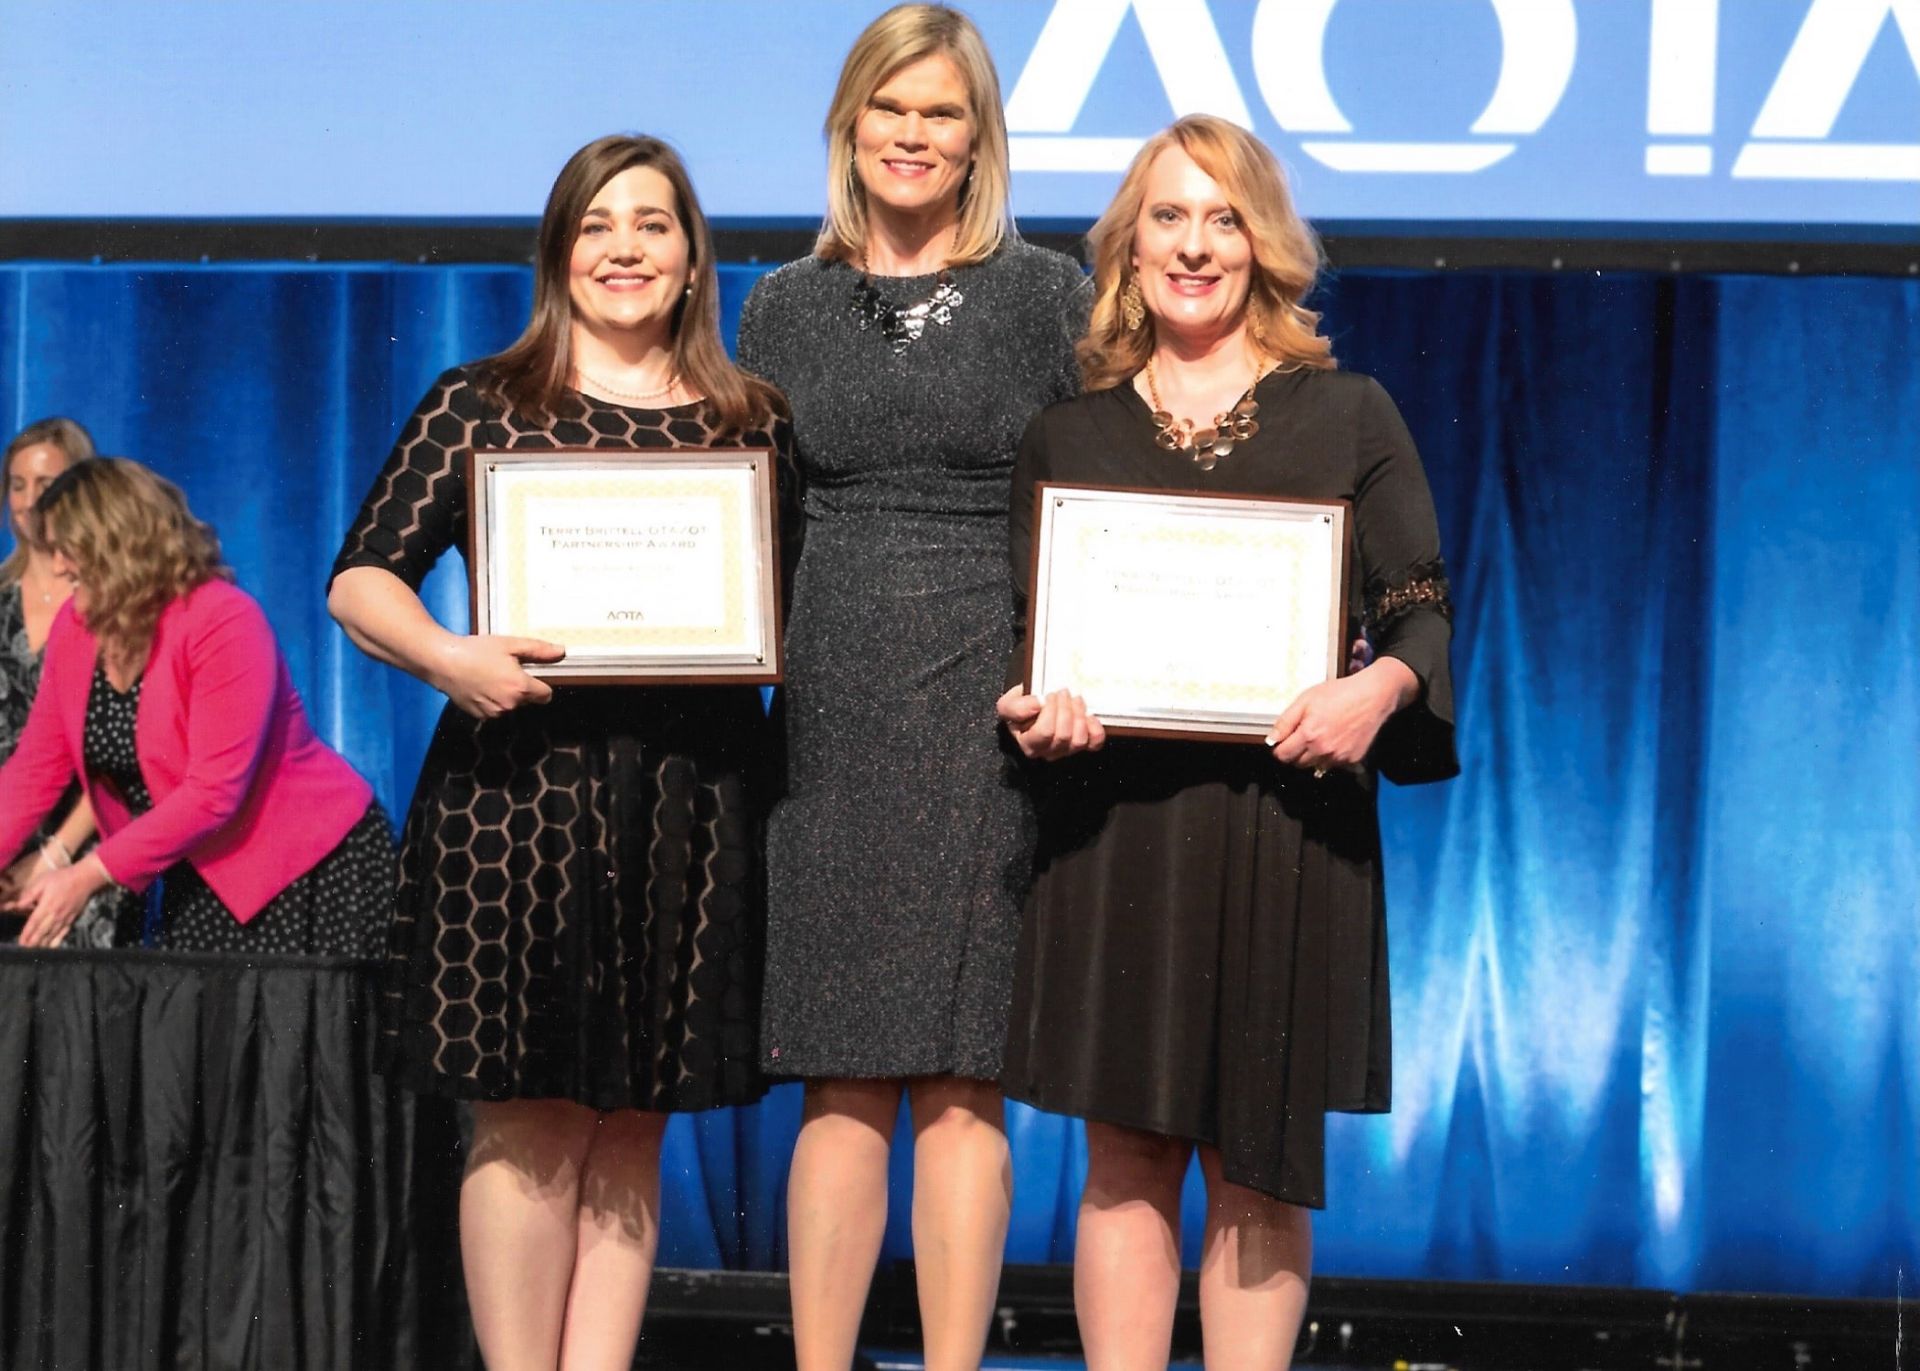 Niccole Rowe and Kimberly Breeden accepting AOTA award in 2018